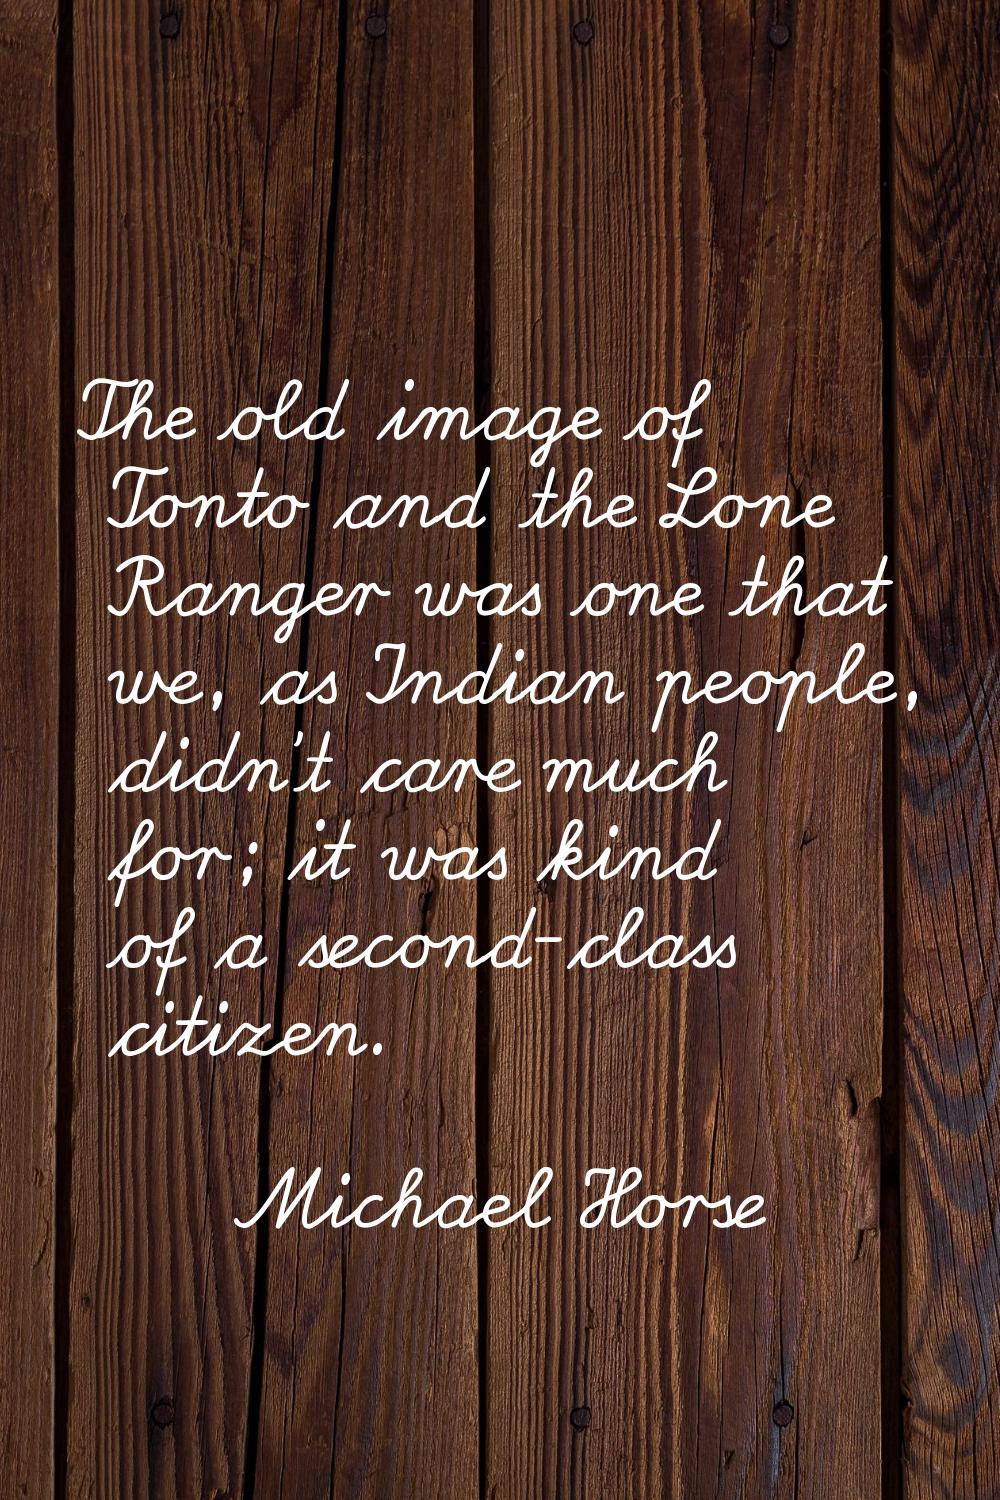 The old image of Tonto and the Lone Ranger was one that we, as Indian people, didn't care much for;